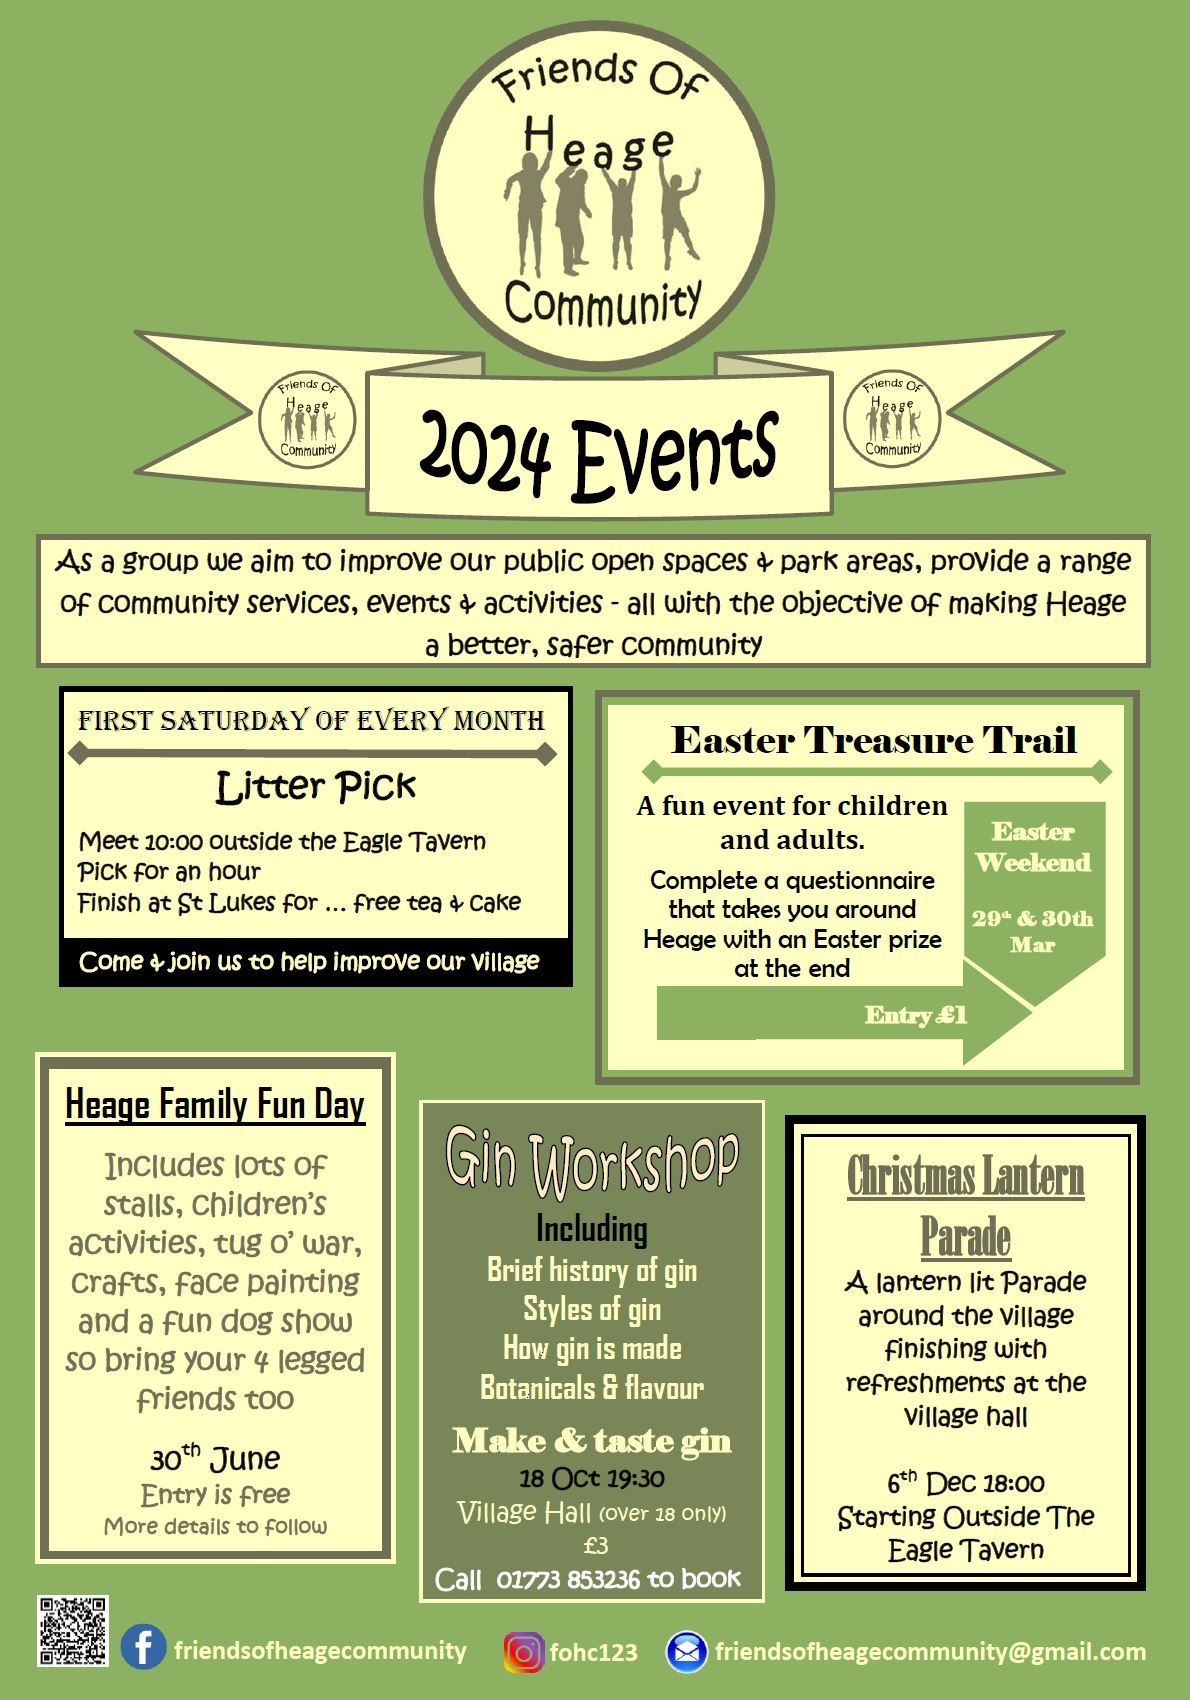 Friends of Heage Community poster promoting the events they are holding in 2024